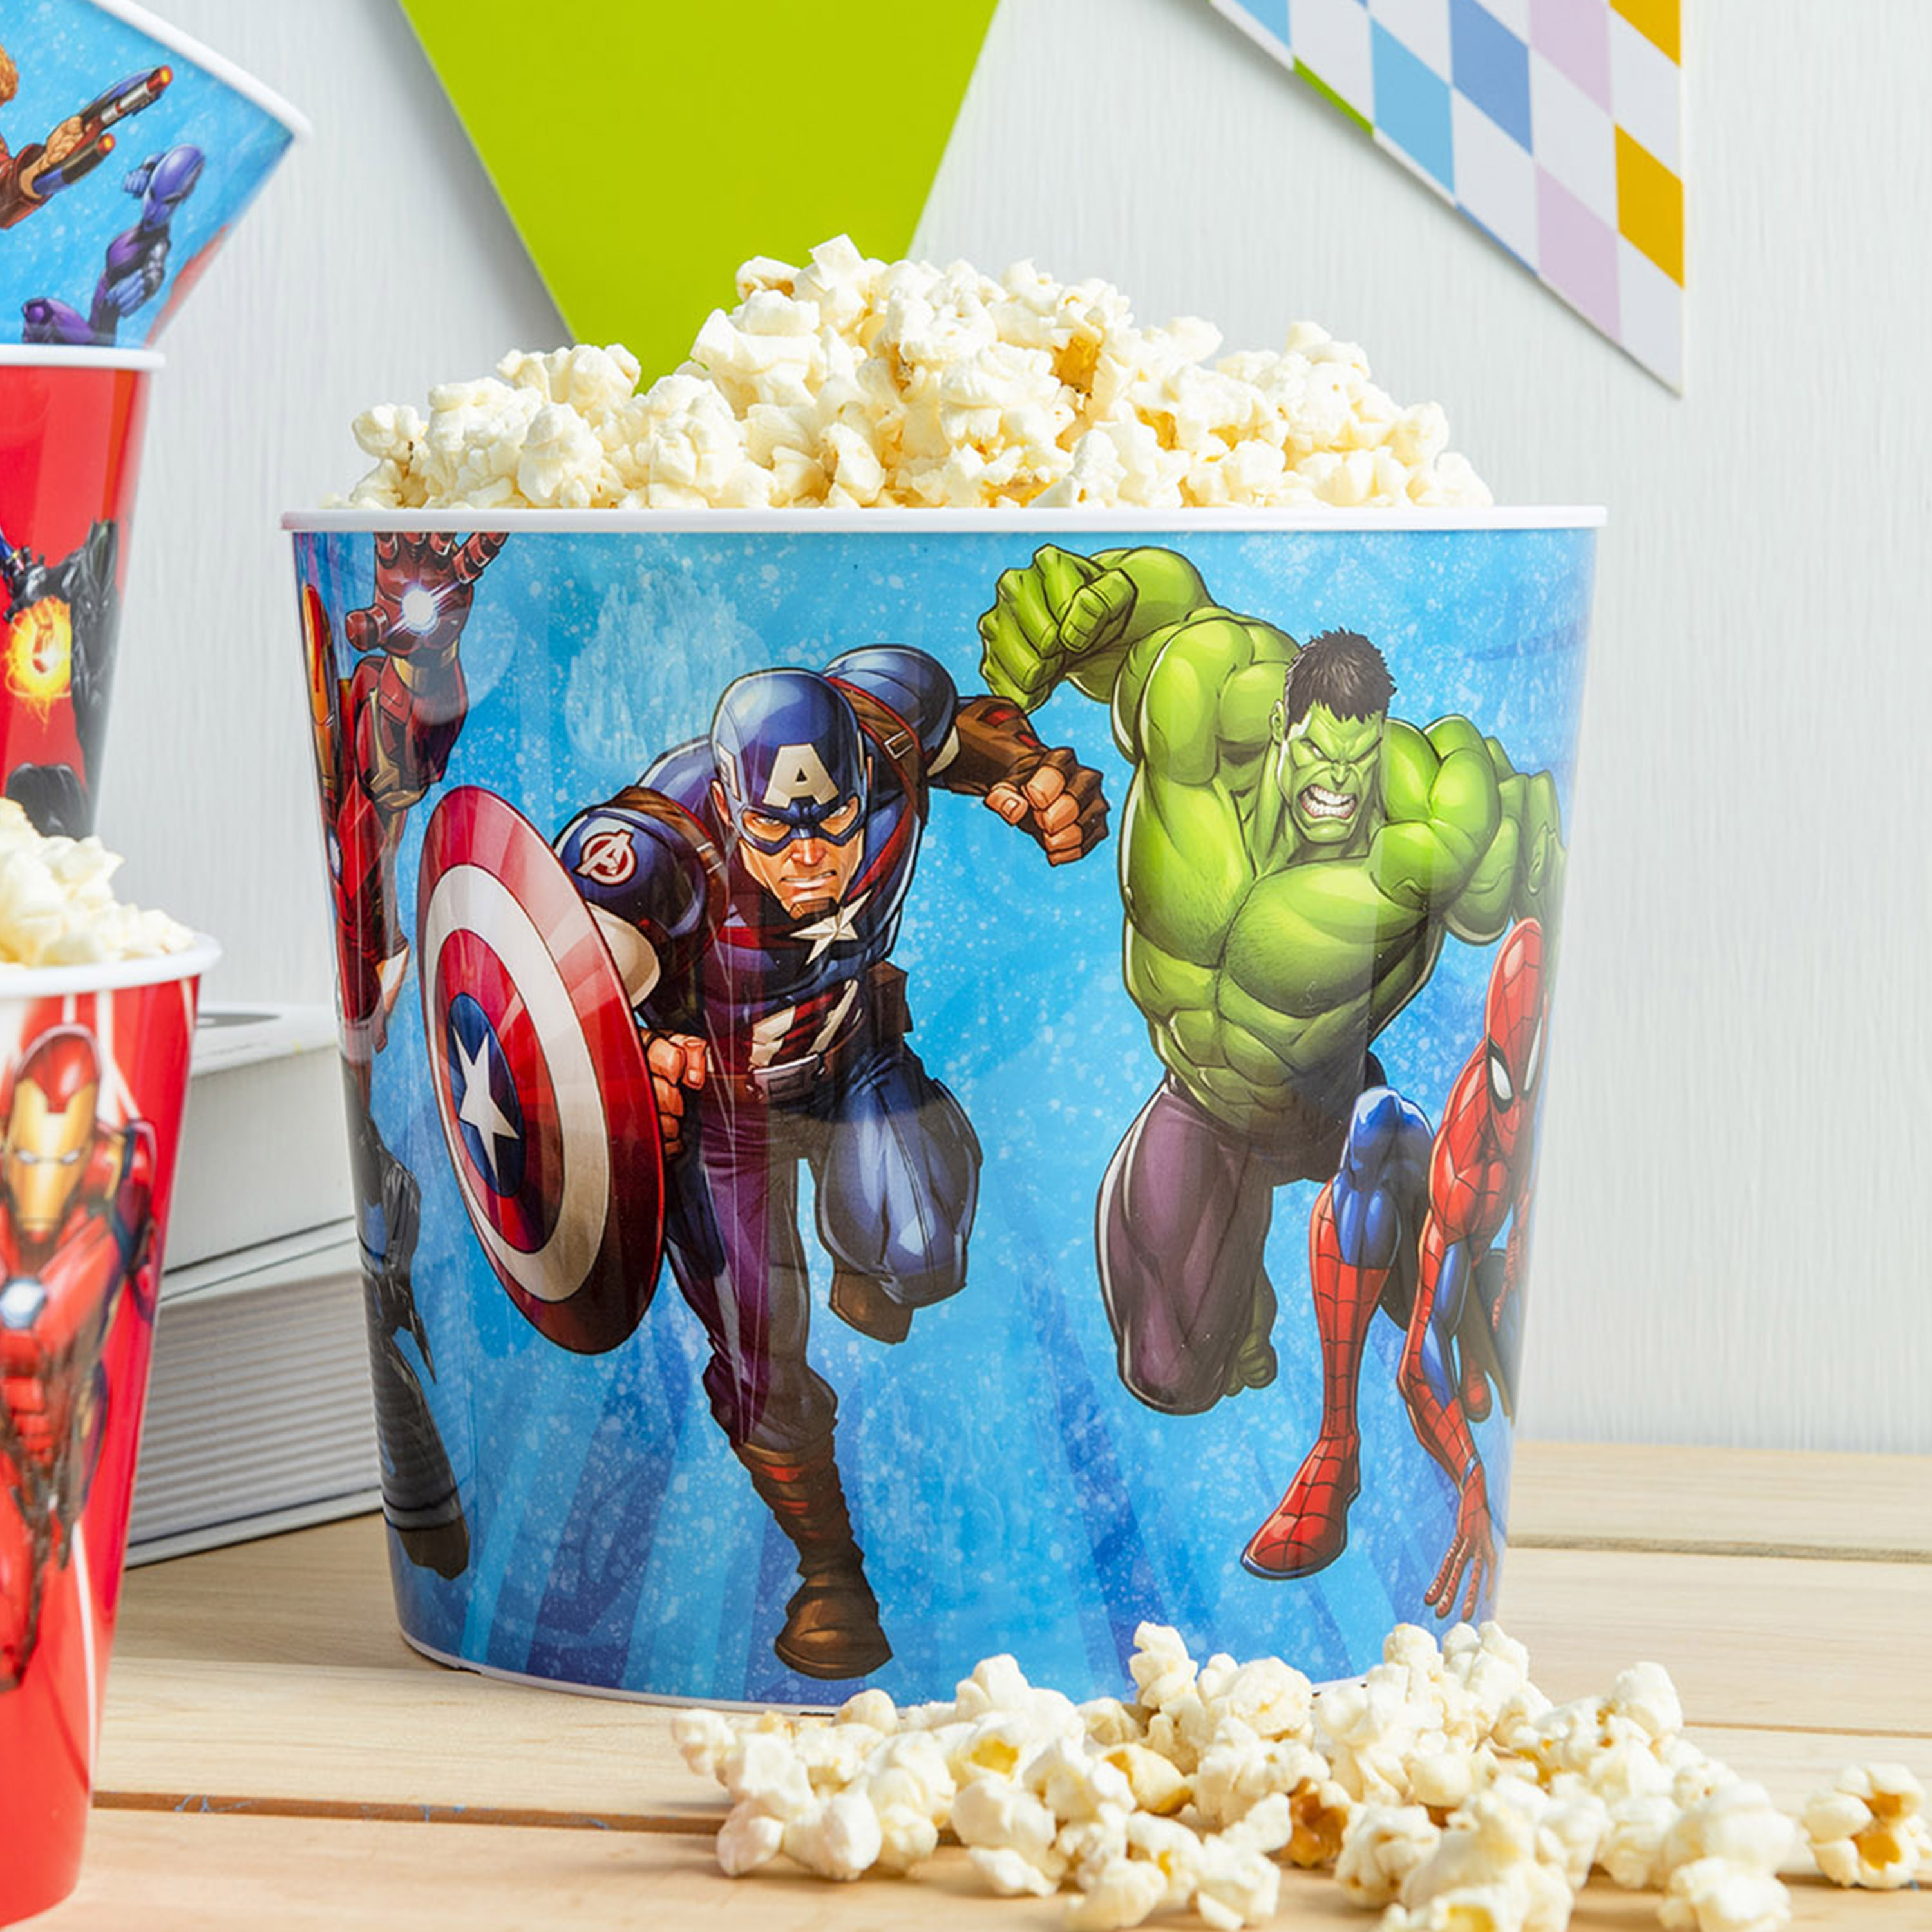 Marvel Comics Plastic Popcorn Container and Bowls, The Hulk, Spider-Man and More, 5-piece set slideshow image 6